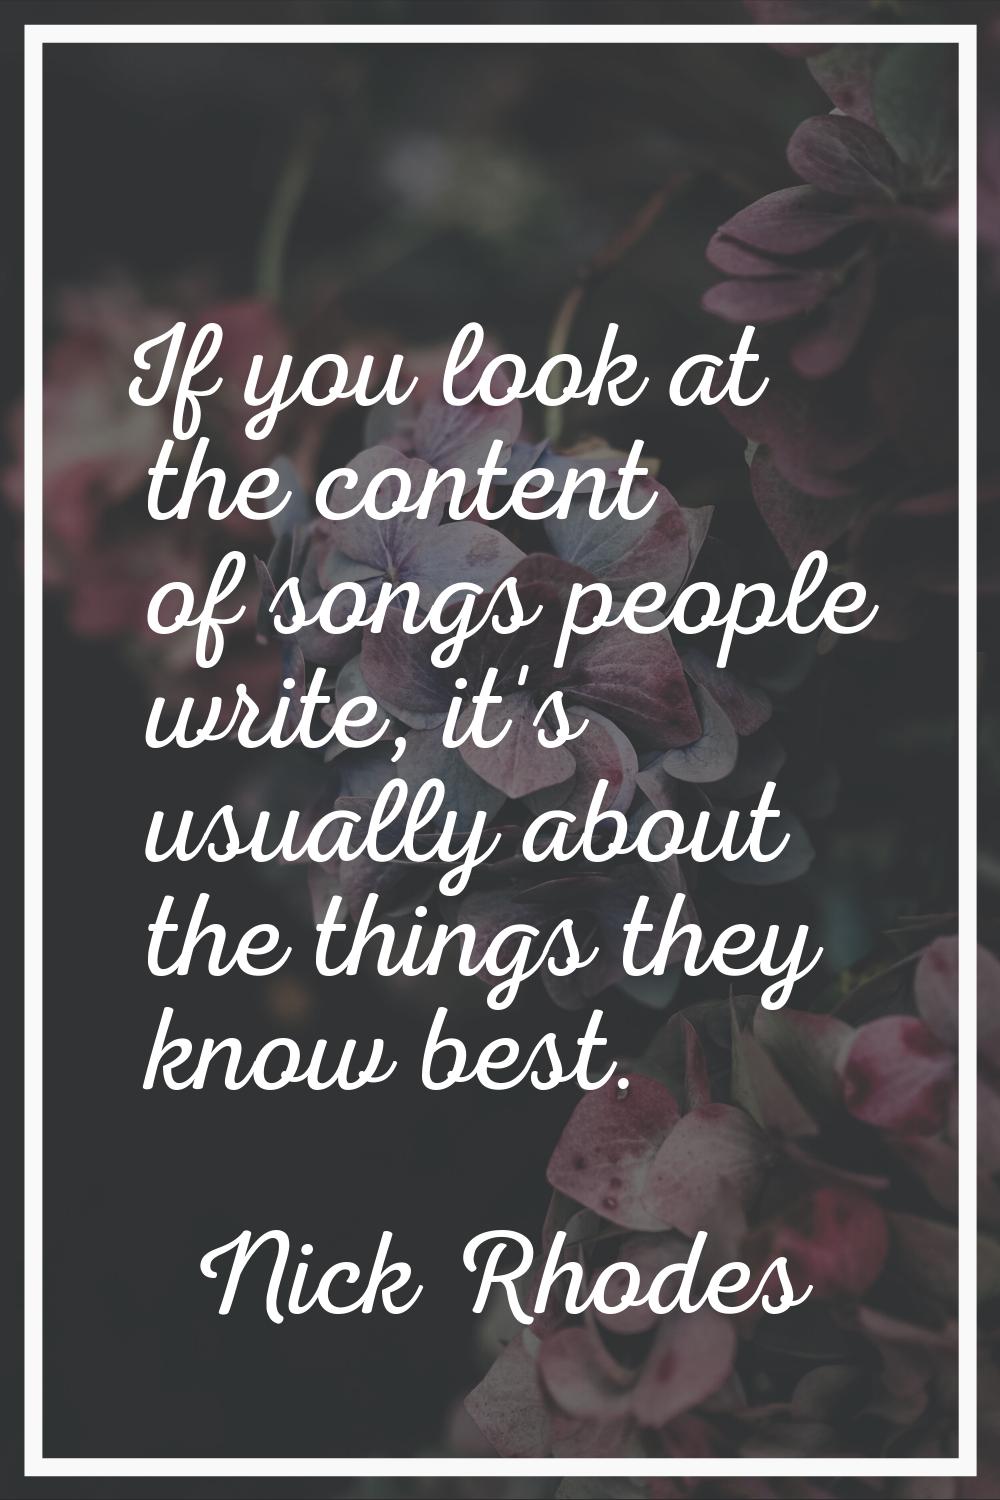 If you look at the content of songs people write, it's usually about the things they know best.